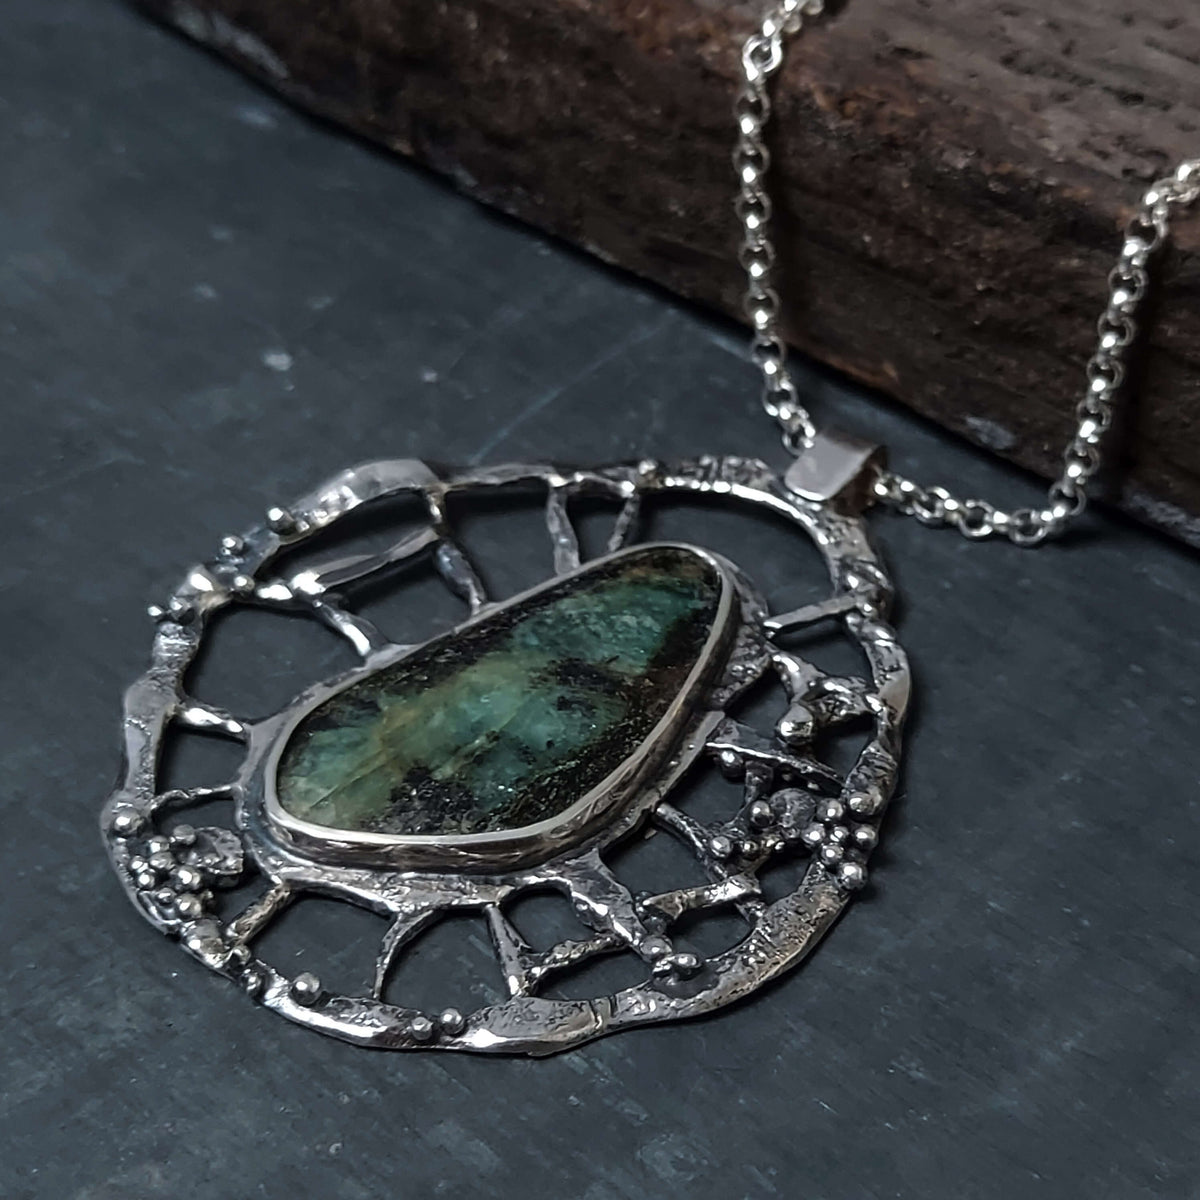 Sterling silver necklace,rustic retro necklace with large emerald, artisan made by roffjewellery.com